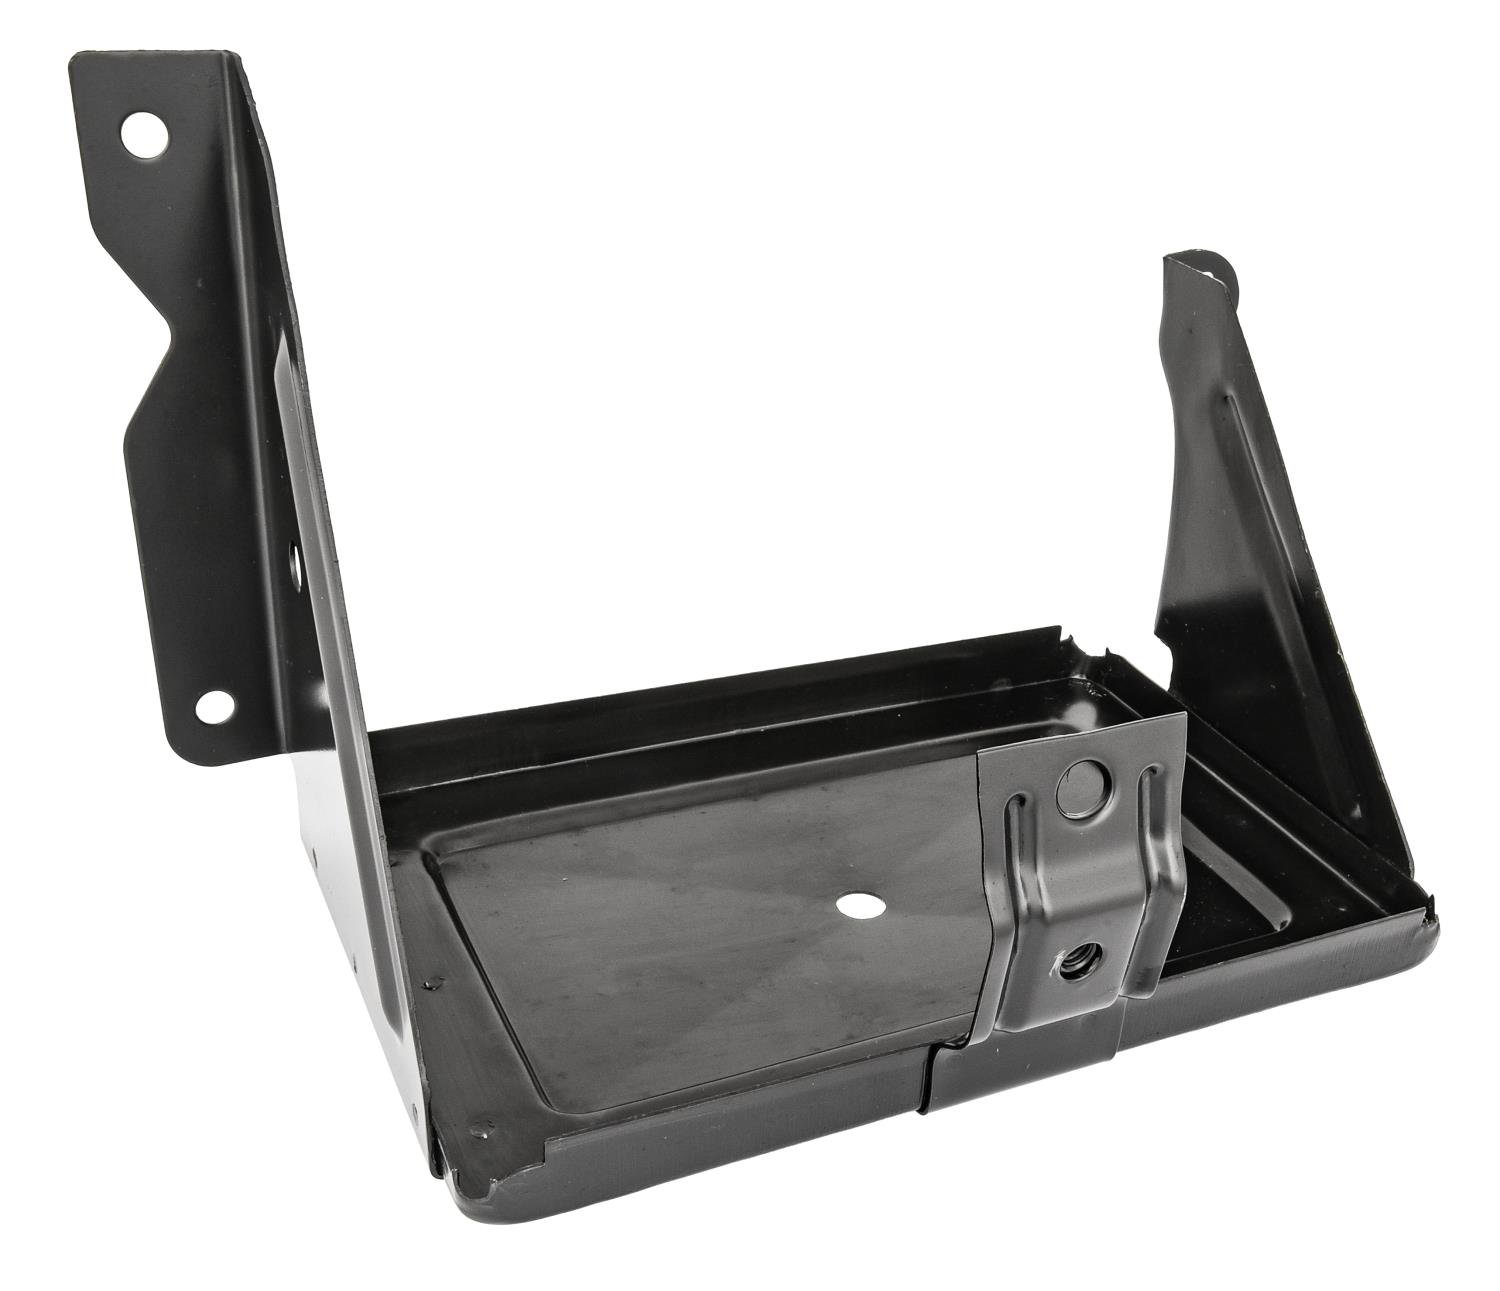 Battery Tray Assembly for 1959-1961 Chevy Bel Air, Biscayne, Brookwood, Impala, Nomad, Sedan Delivery, El Camino